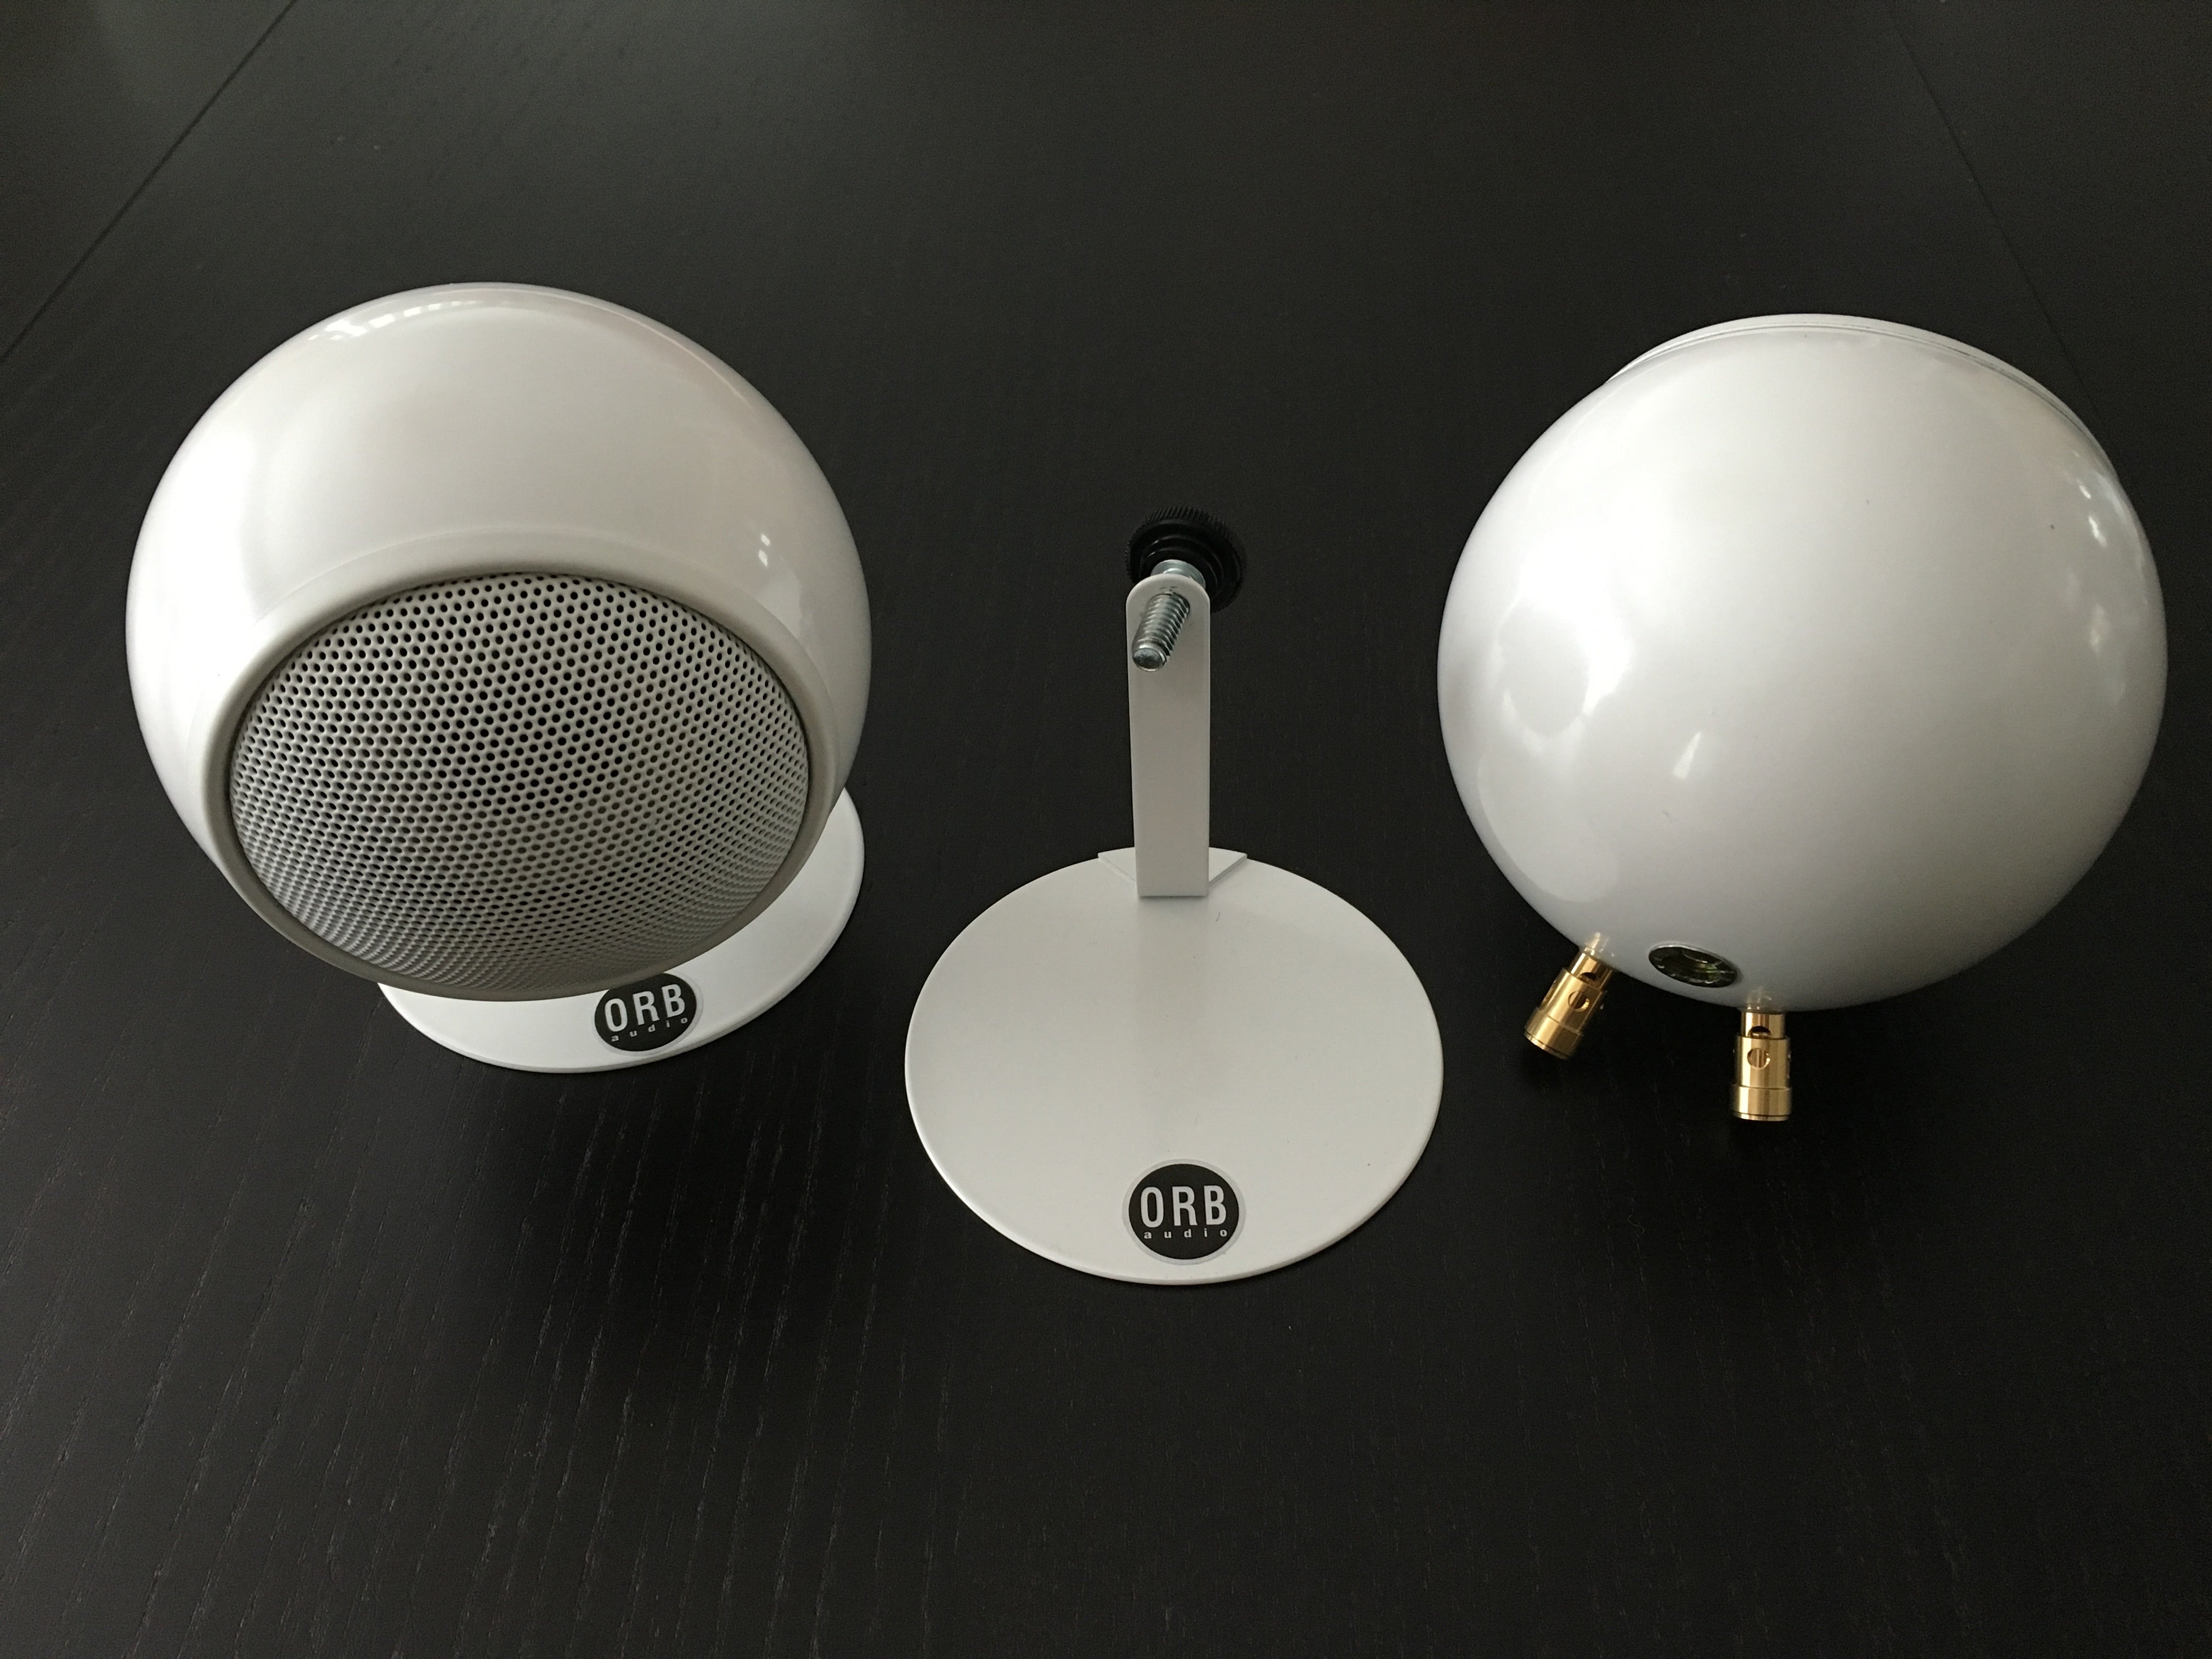 Orb Audio Complete Home Theater System review: A pint ...
